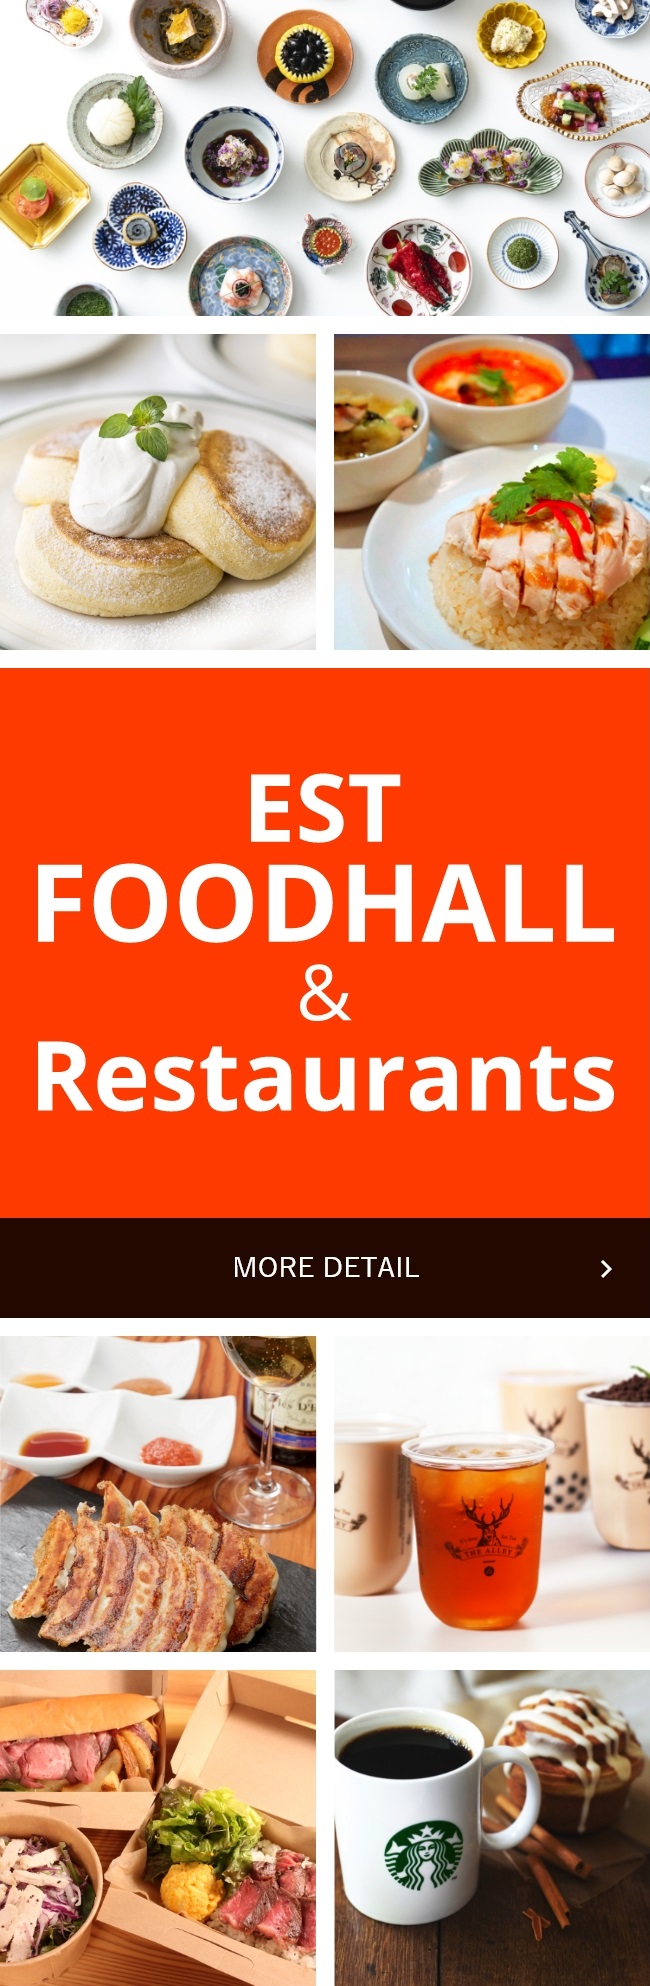 EST FOODHALL and Restaurants